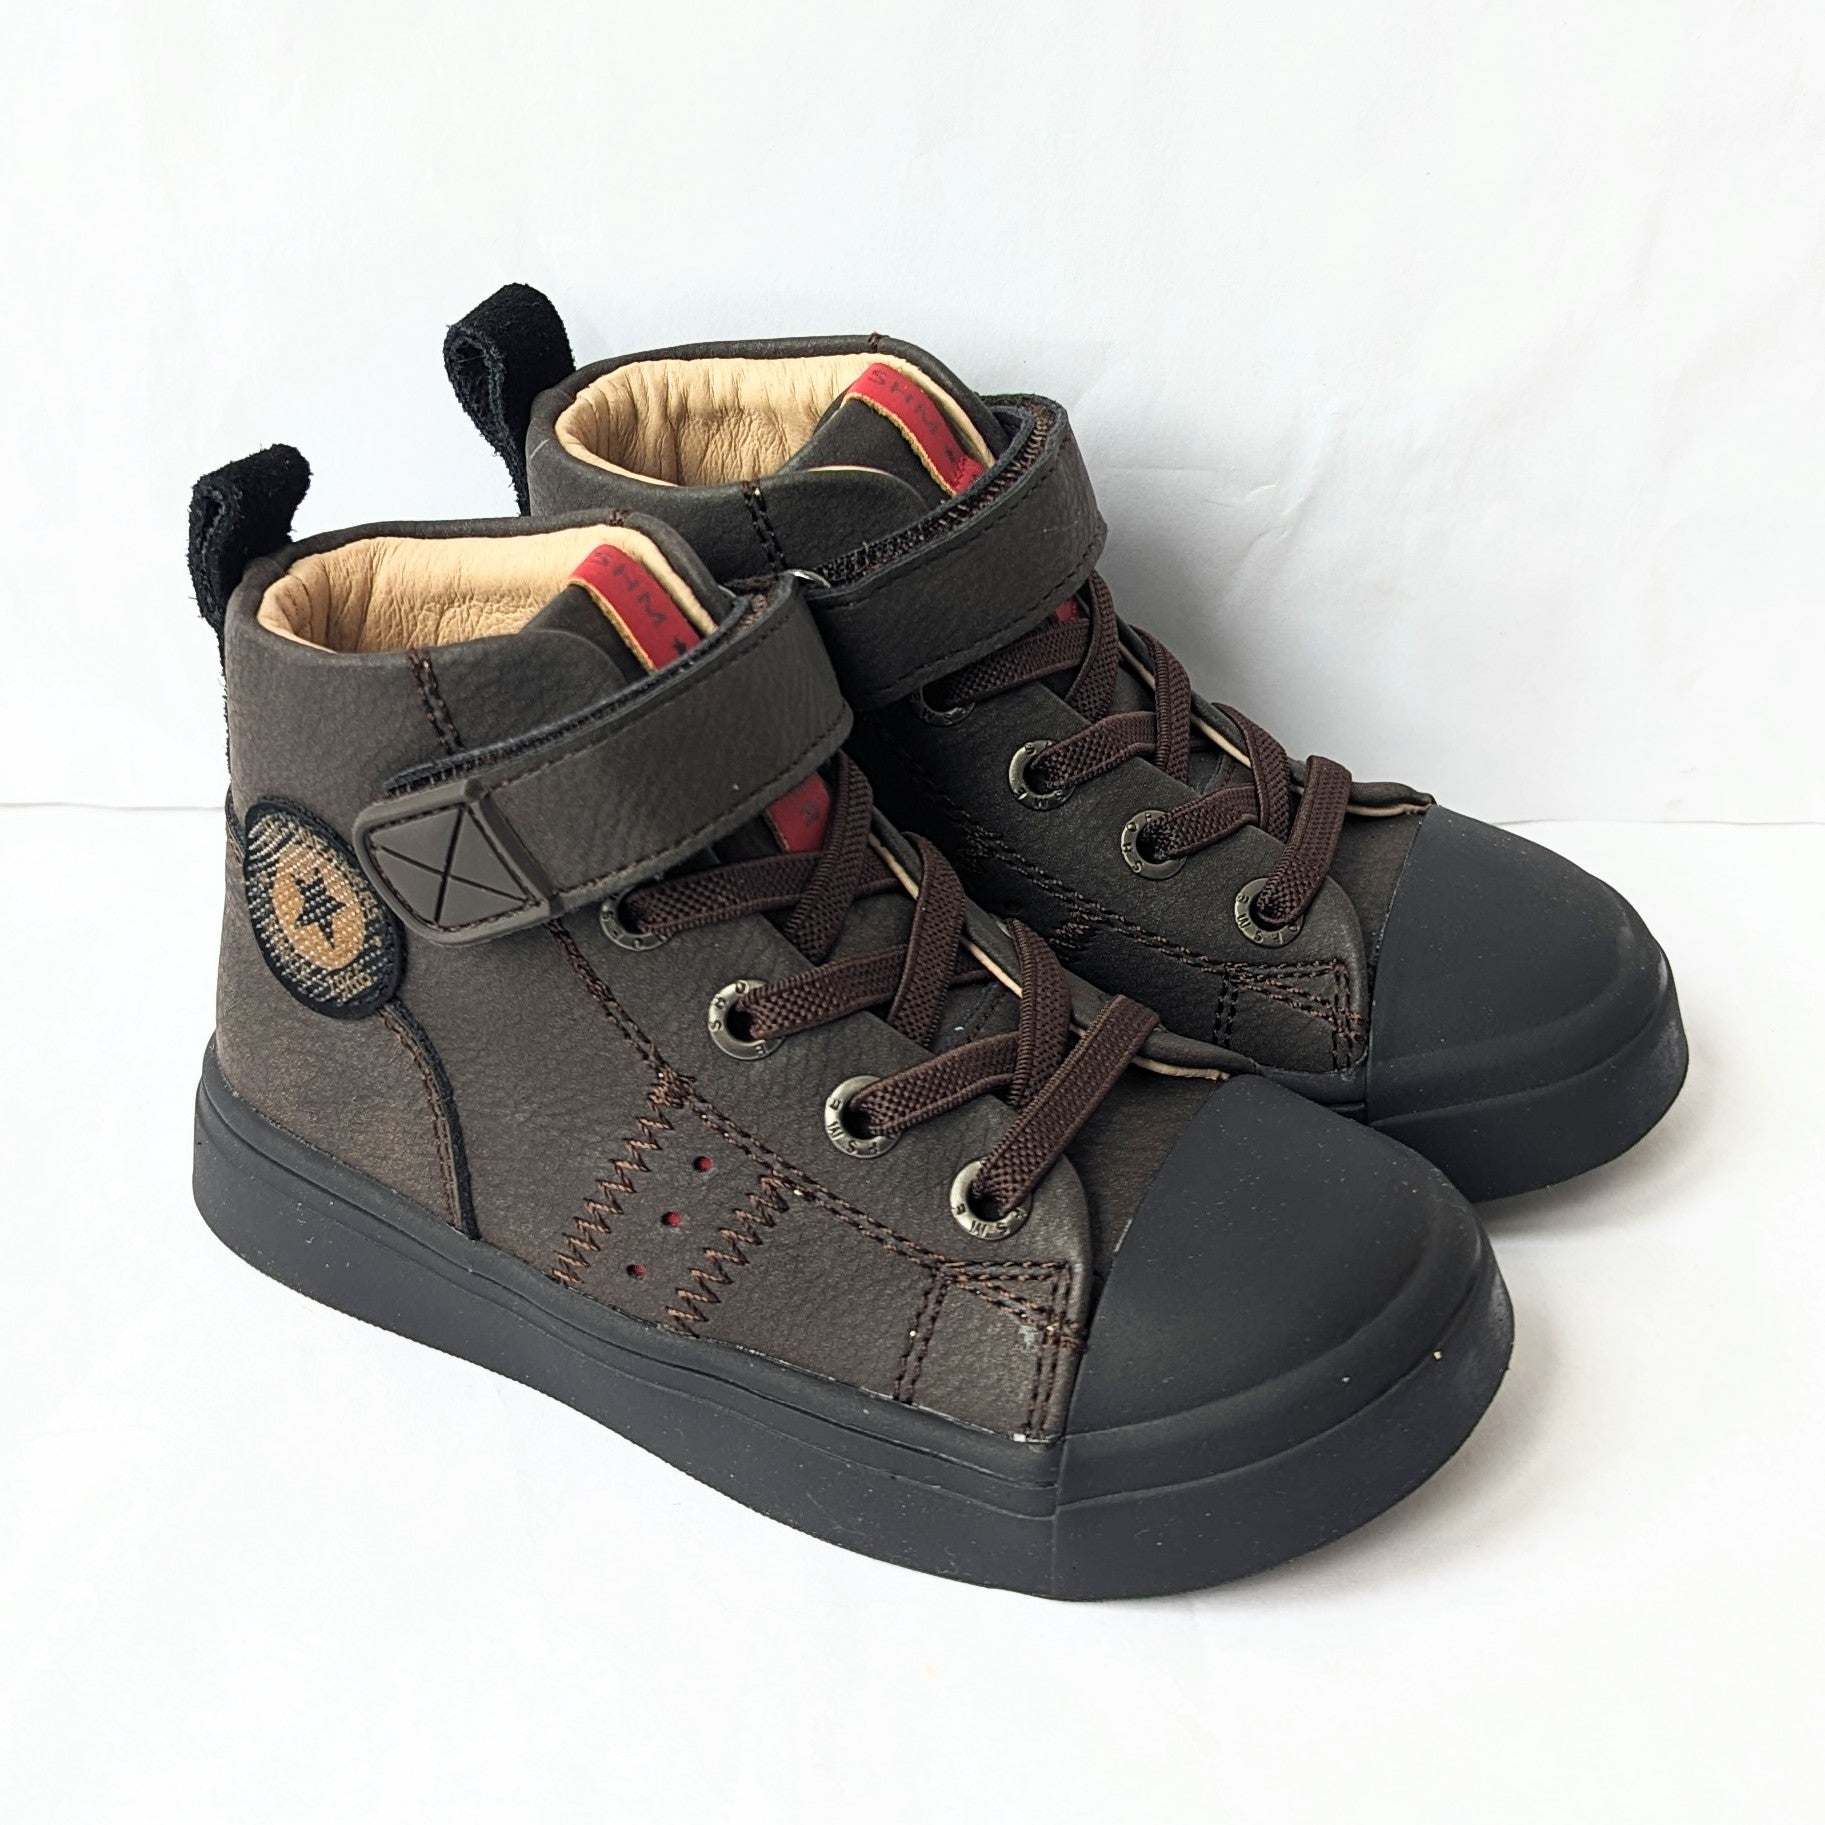 A pair of hi-top unisex boots by Shoesme, style SH23W024-D, with toe bumper and elastic lace and velcro fastening. Angled view.